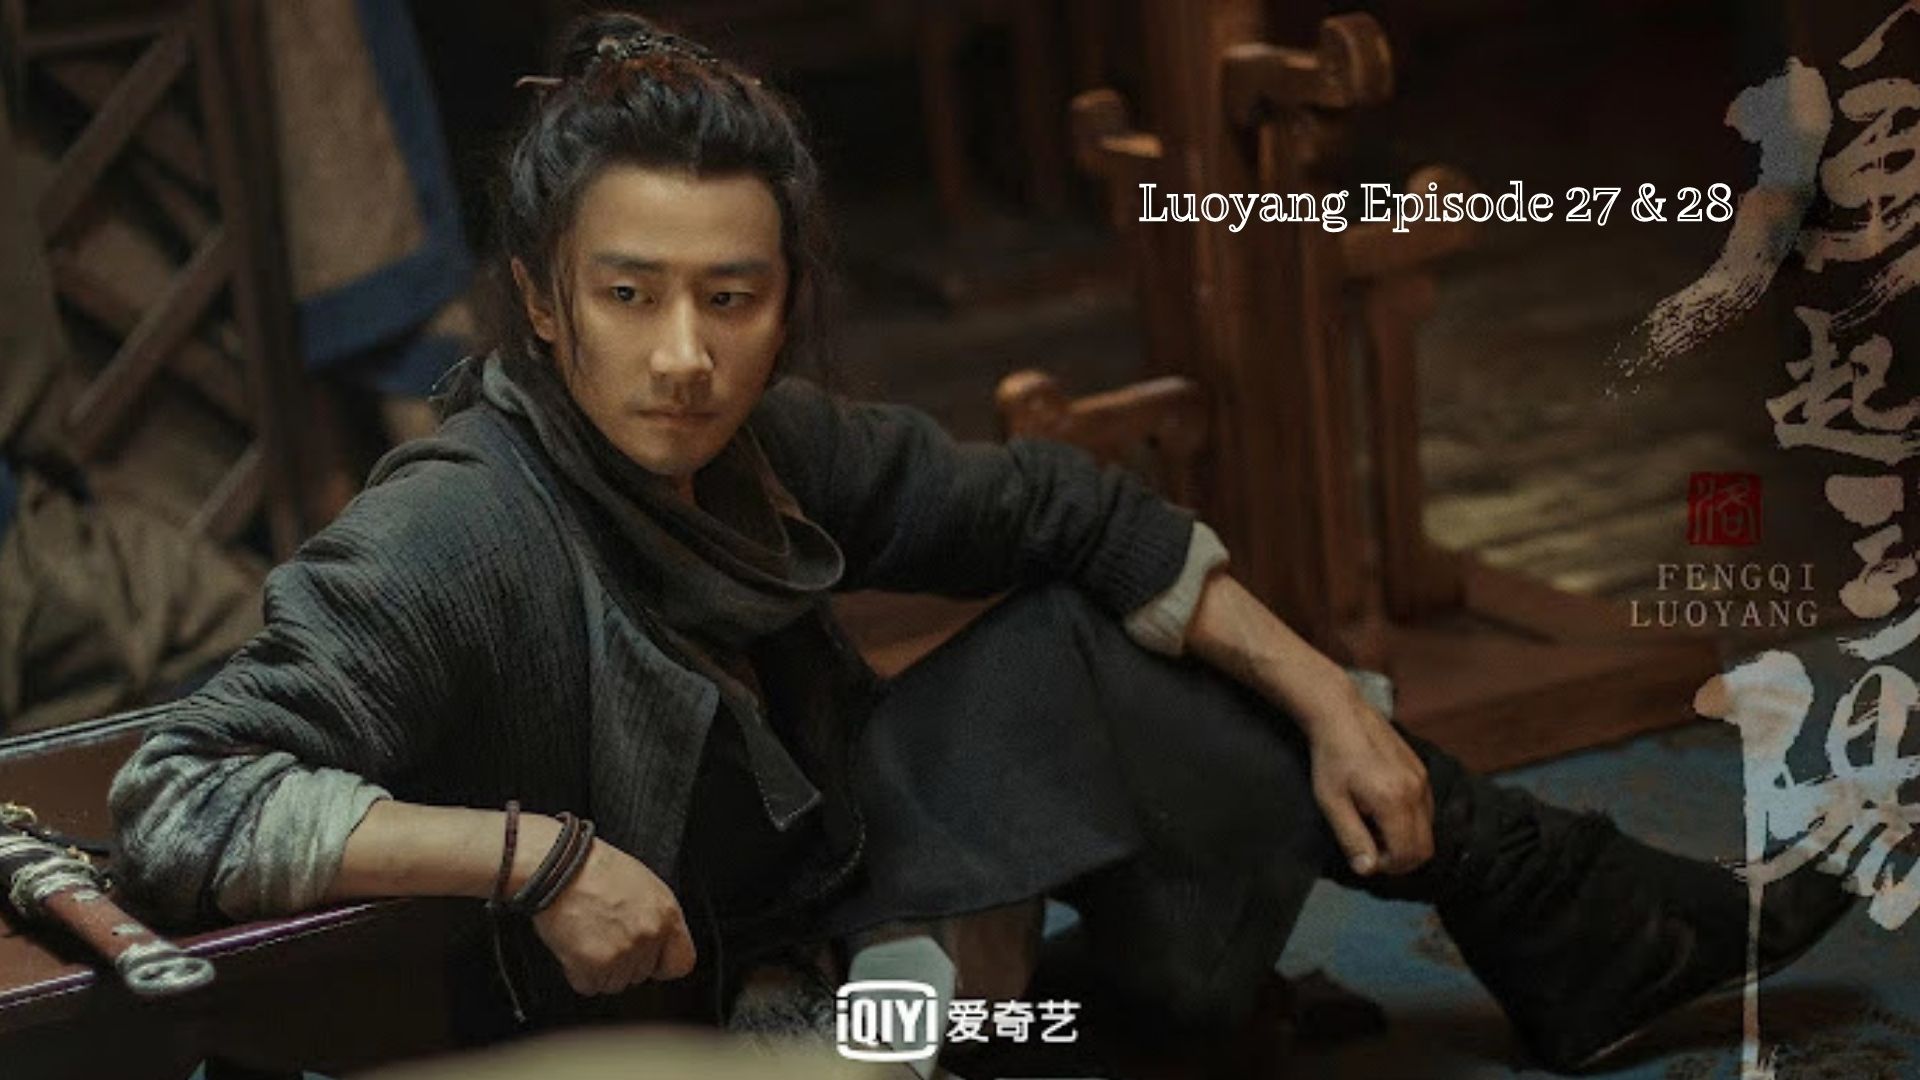 ‘Luoyang’ Episodes 27 & 28: An Alter in the Plans?